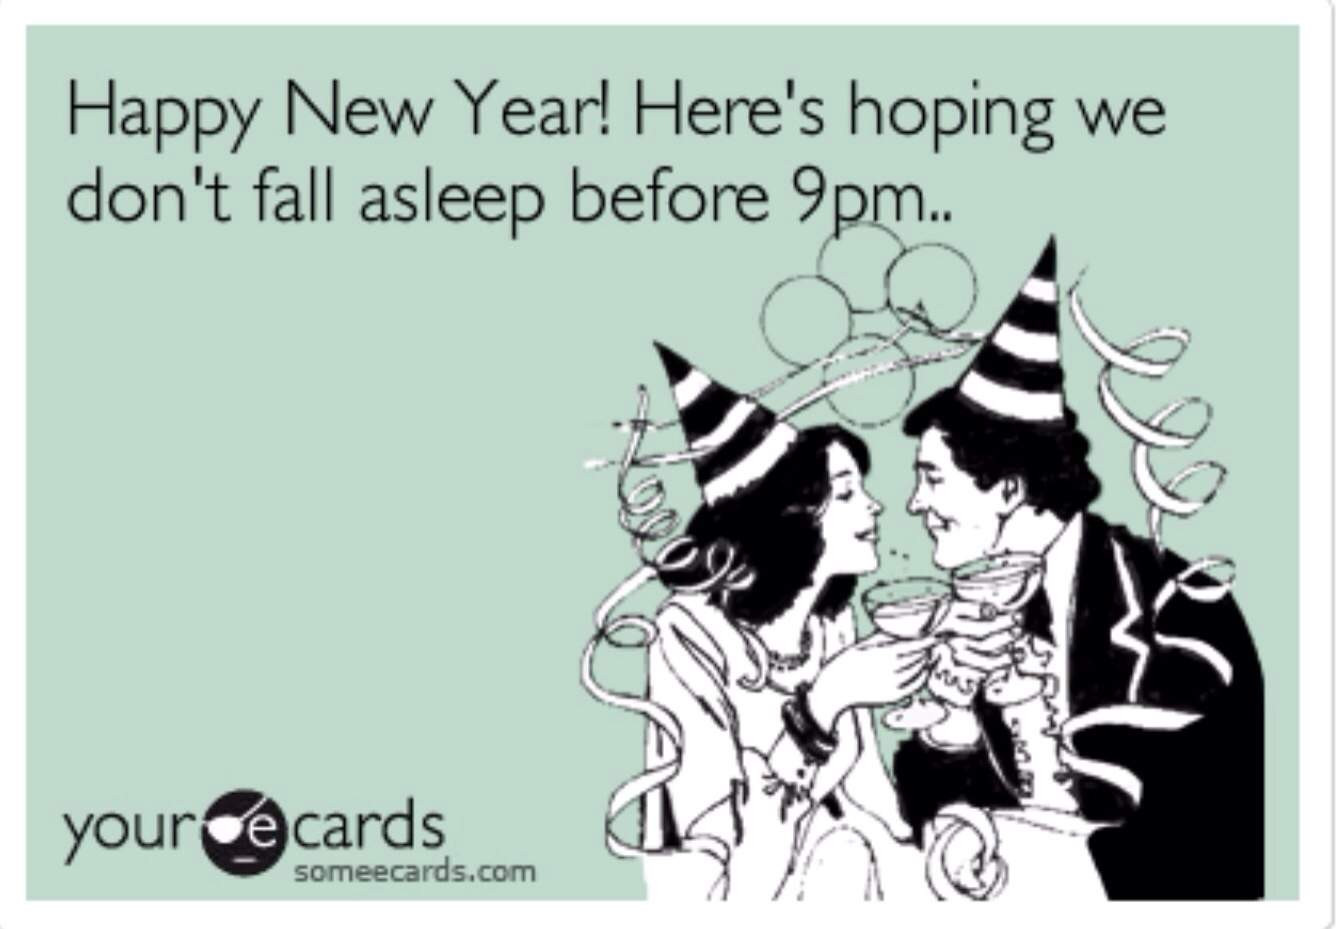 Funny Happy New Year Quote
 Happy New Years 2015 Quotes Greetings Wishes & Sayings